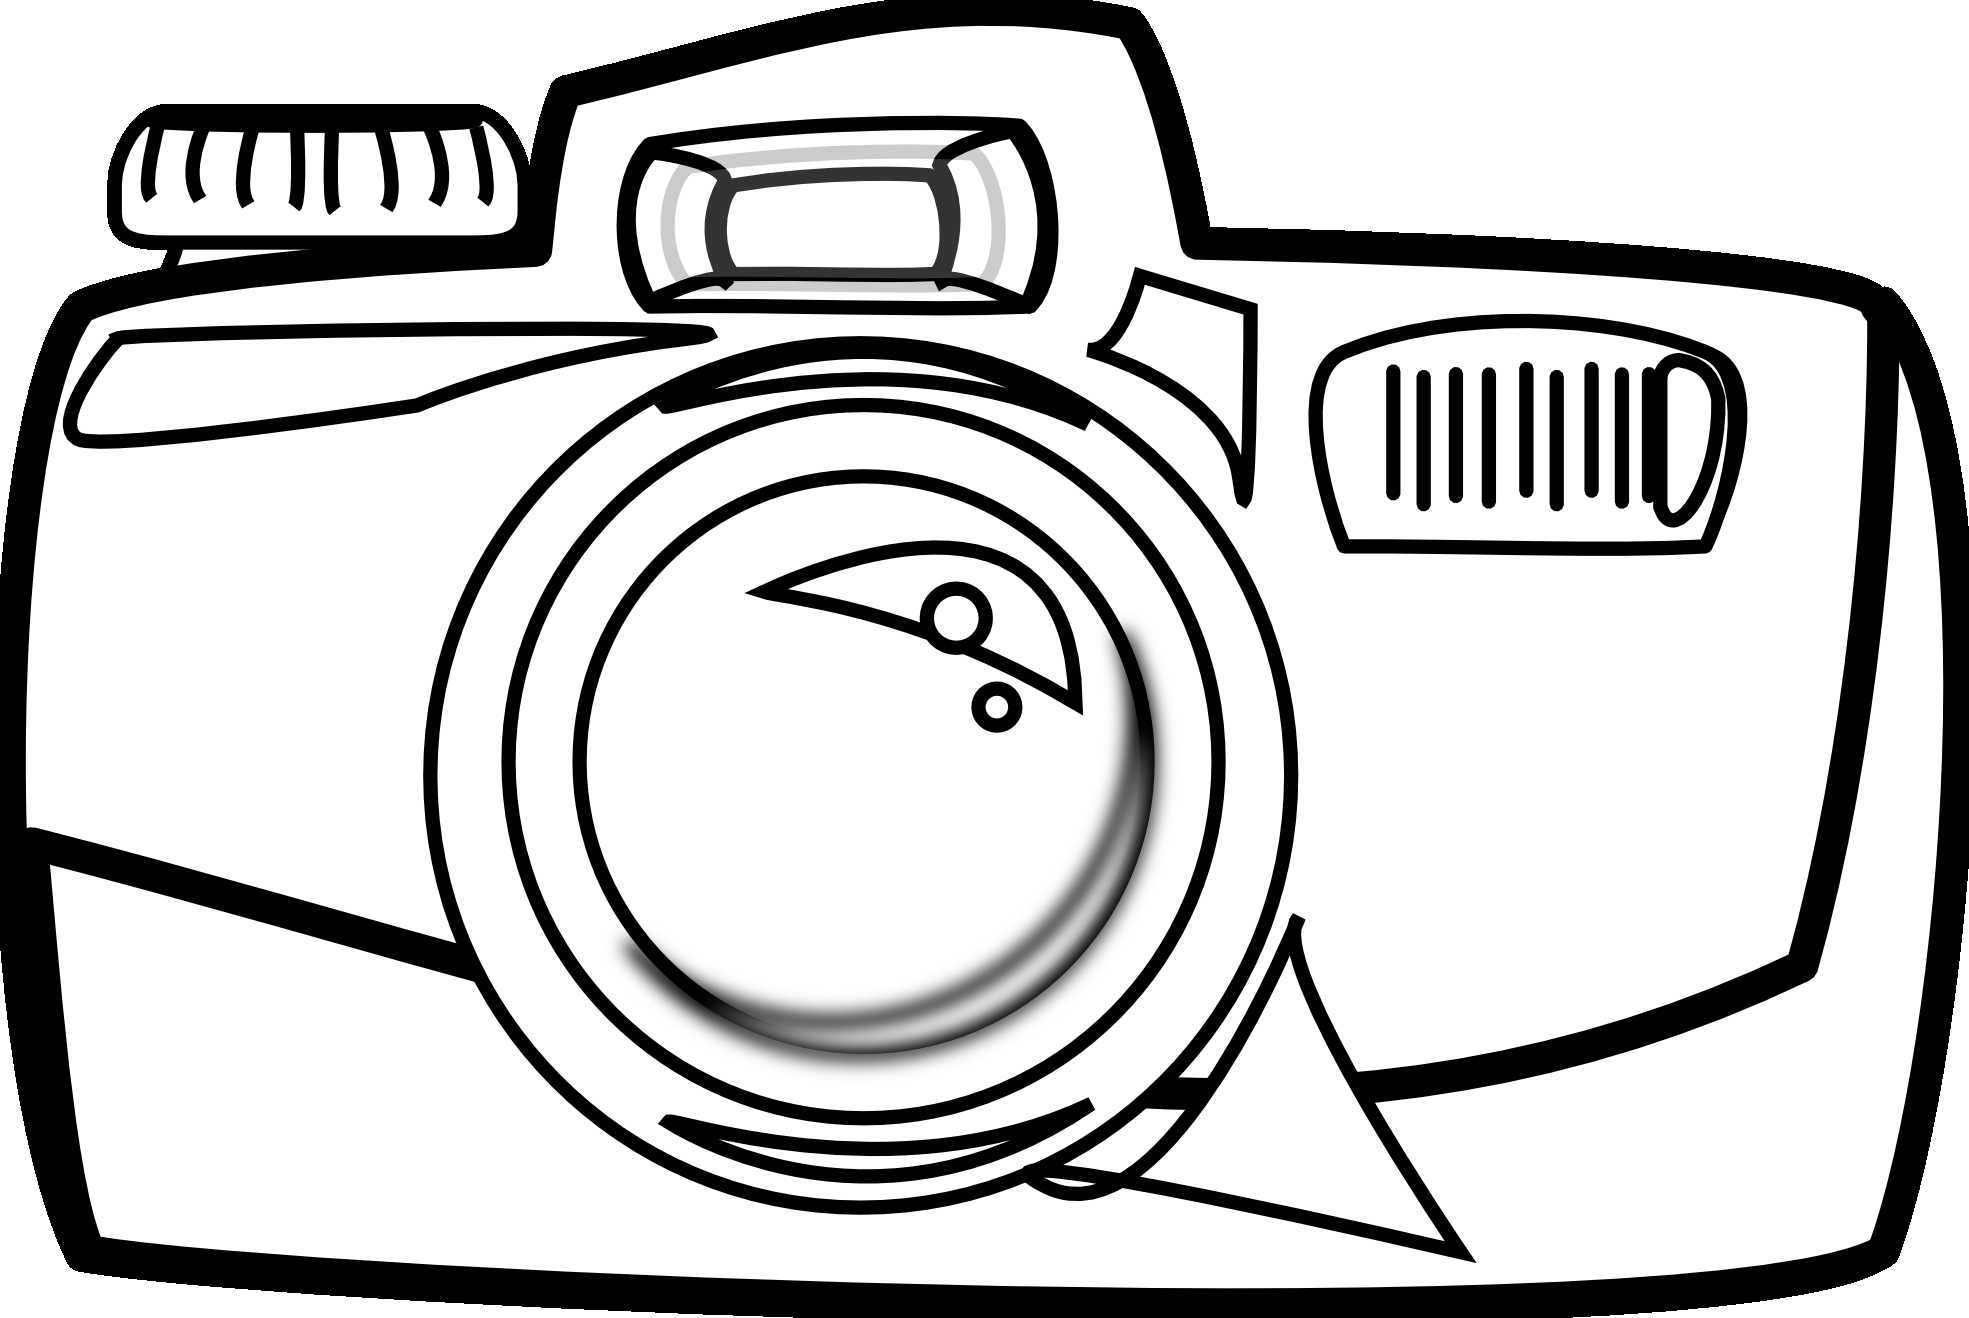 Lovely Vintage Camera Outline 99 Ideas - Camera Clipart Black And White - HD Wallpaper 